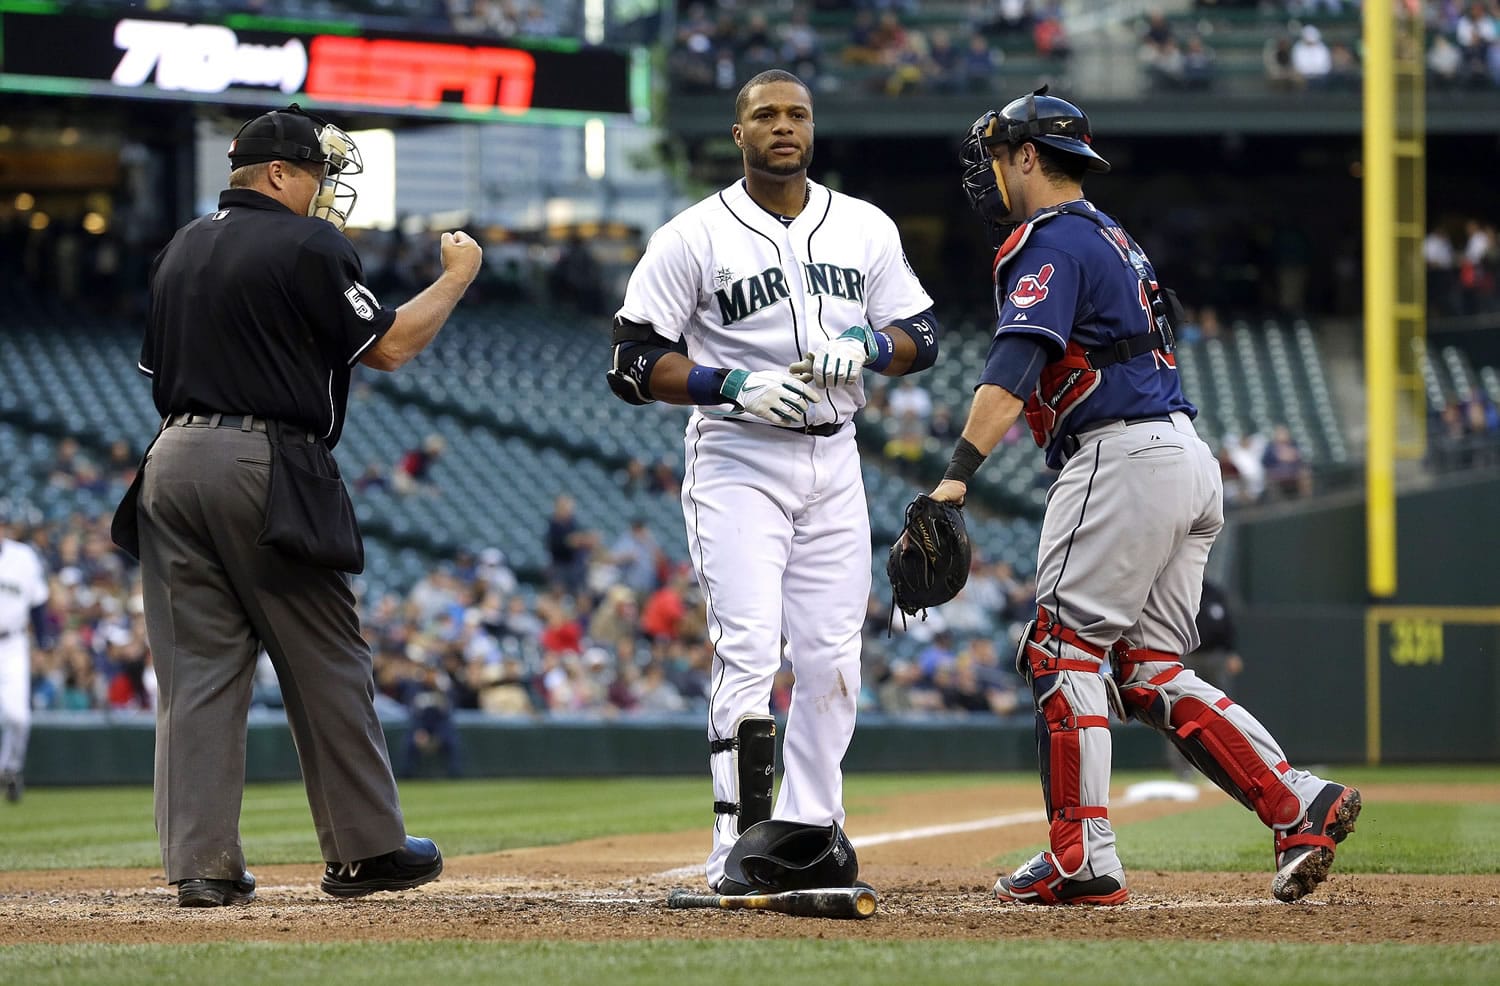 Home plate umpire Marvin Hudson, left, signals Seattle Mariners' Robinson Cano, center, out after he struck out swinging as Cleveland Indians catcher Yan Gomes stands next to them at the end of the fourth inning of a baseball game, Saturday, June 28, 2014, in Seattle. (AP Photo/Ted S.